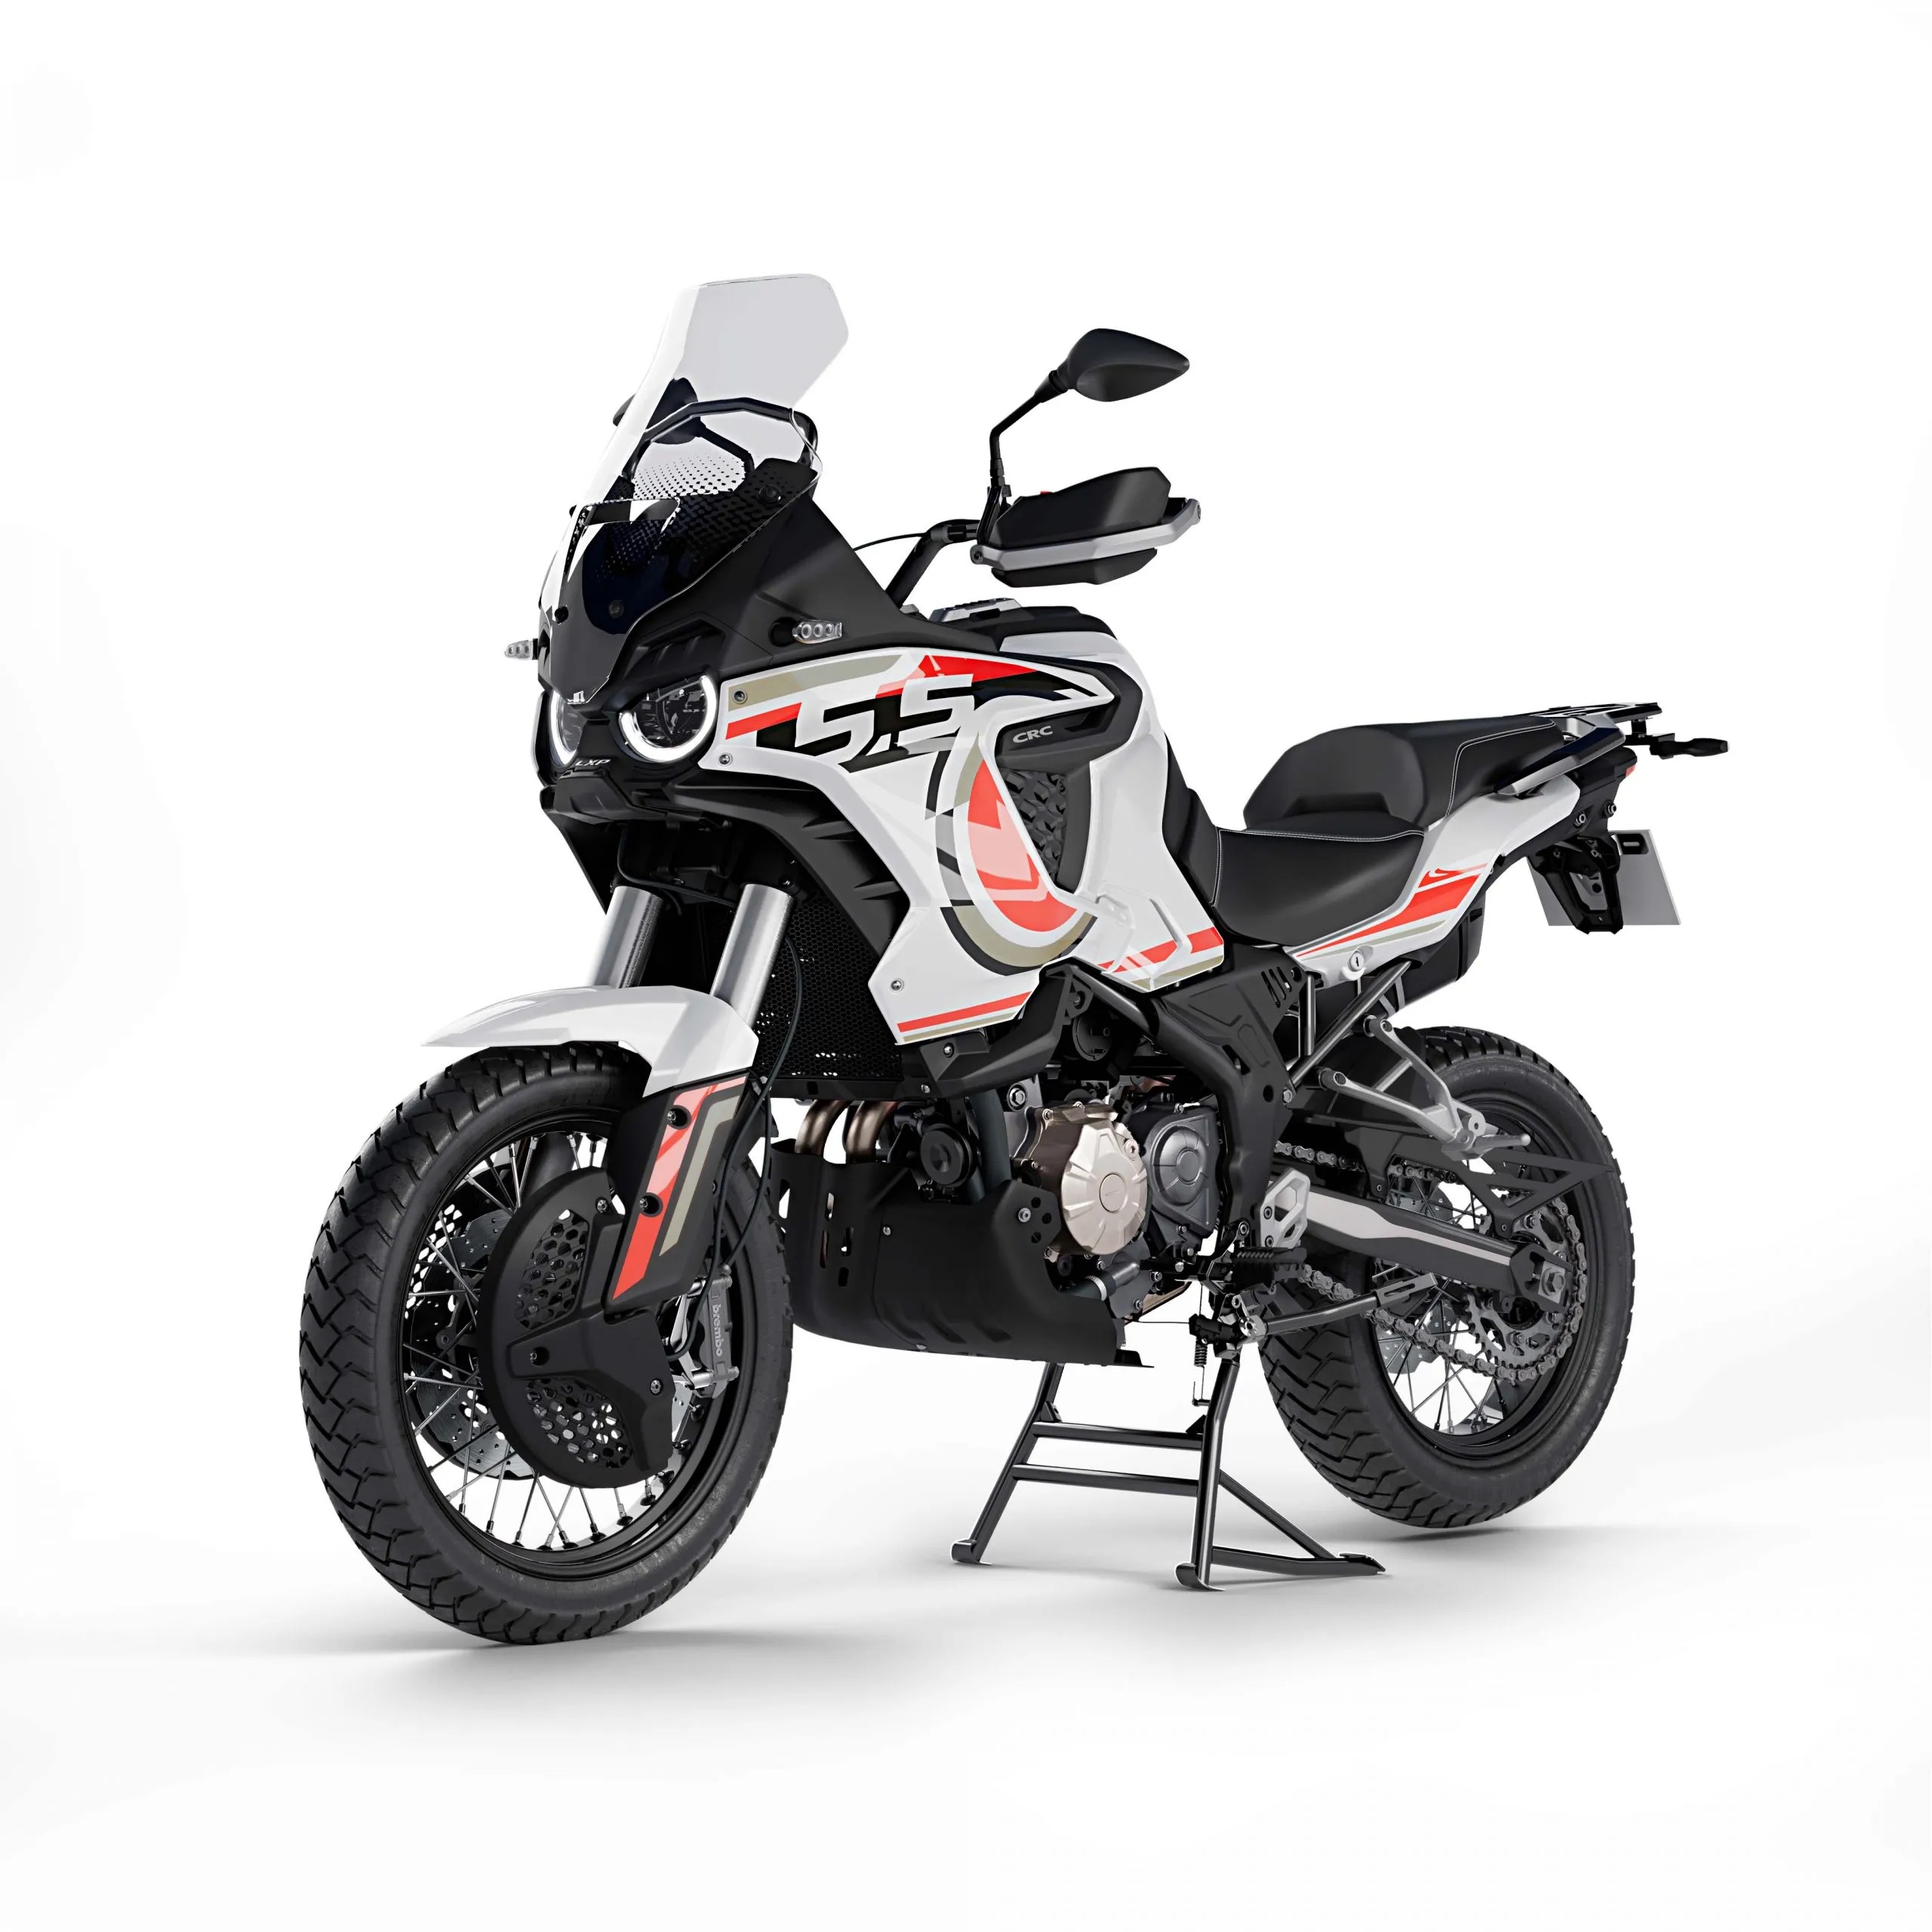 Lucky Explorer Project adventurer-touring motorcycle from MV Agusta